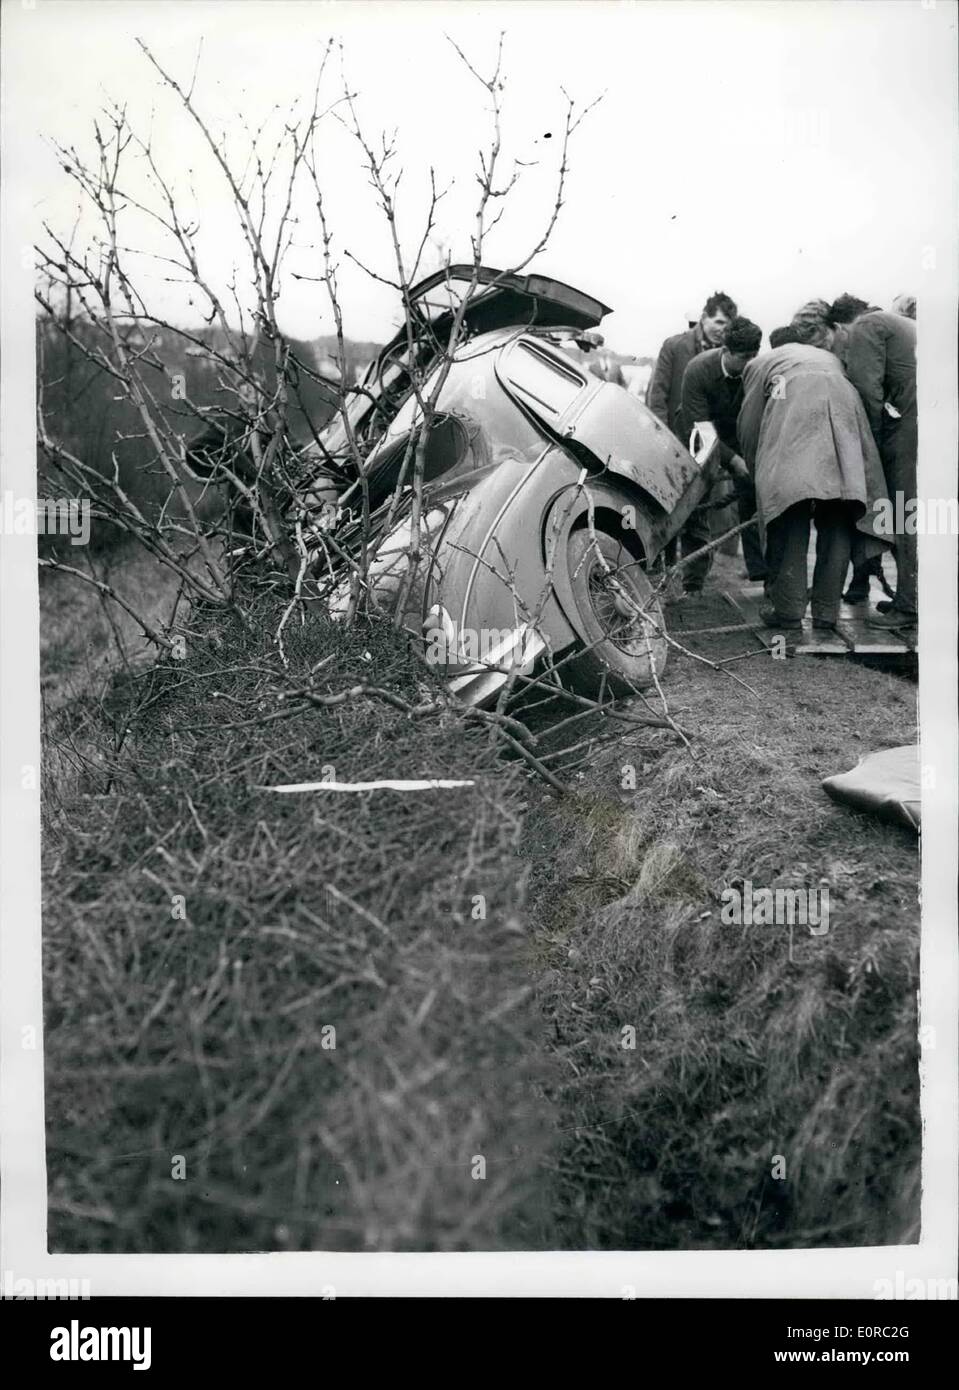 Jan. 01, 1959 - MIKE HAWTHORN KILLED AS HIS CAR HITS A TREE ON GUILDFORD BY-PASS MIKE HAWTHORN, Britain's champion racing driver who flirted with death hundreds of times on racing circuits, died today in a car crash at Guildford, Surrey. His black Jaguar was in collision with a lorry on the Guildford By-pass. It double-somersaulted, then smash against a tree, killing Mike Hawthorn outright. The death of the 29-year-old champion came only a month after he had retired from motor racing while he was the holder of the sport's greatest honour Stock Photo